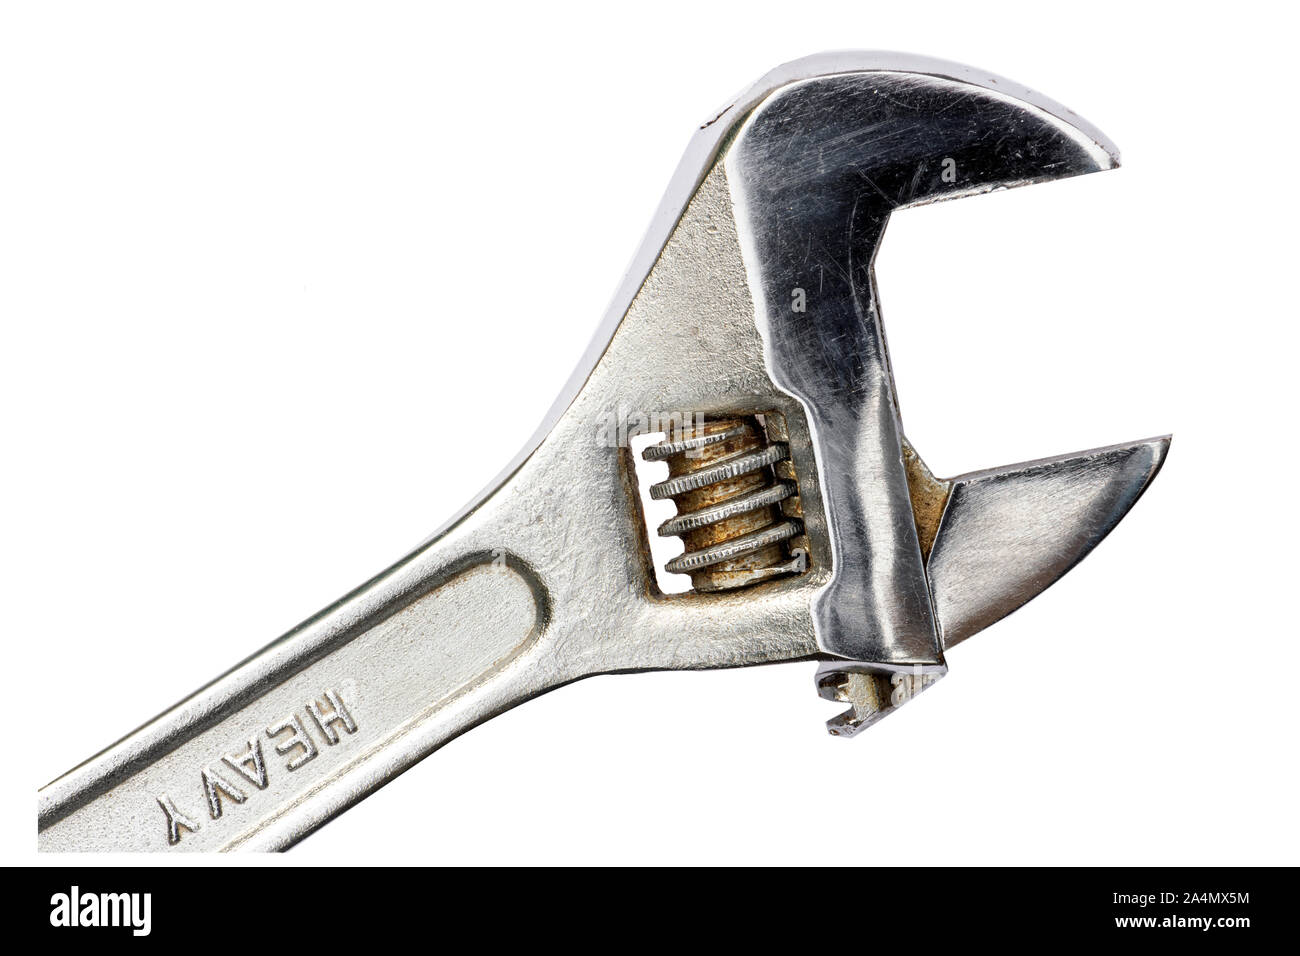 Adjustable spanner cut out on a white background, UK. Adjustable wrench close up with the jaws open. Stock Photo